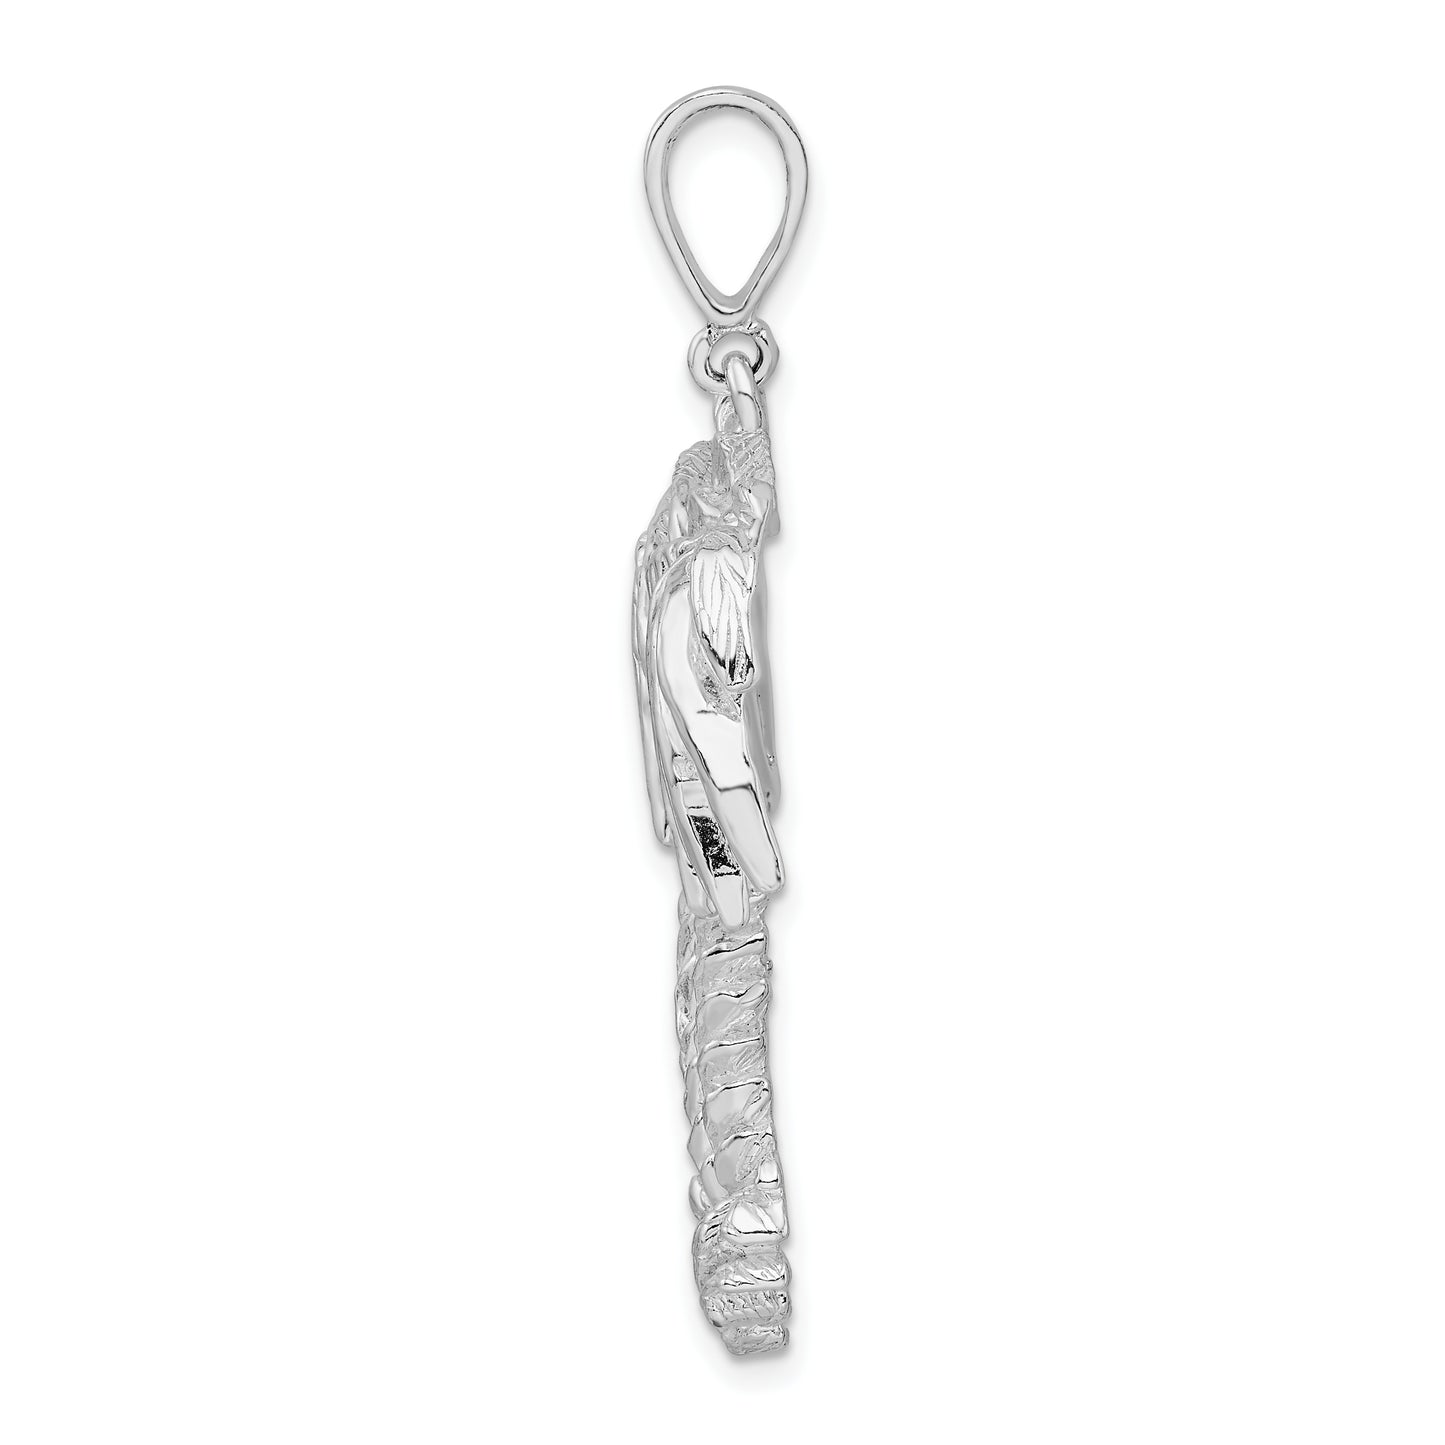 Sterling Silver Polished Palm Trees Pendant